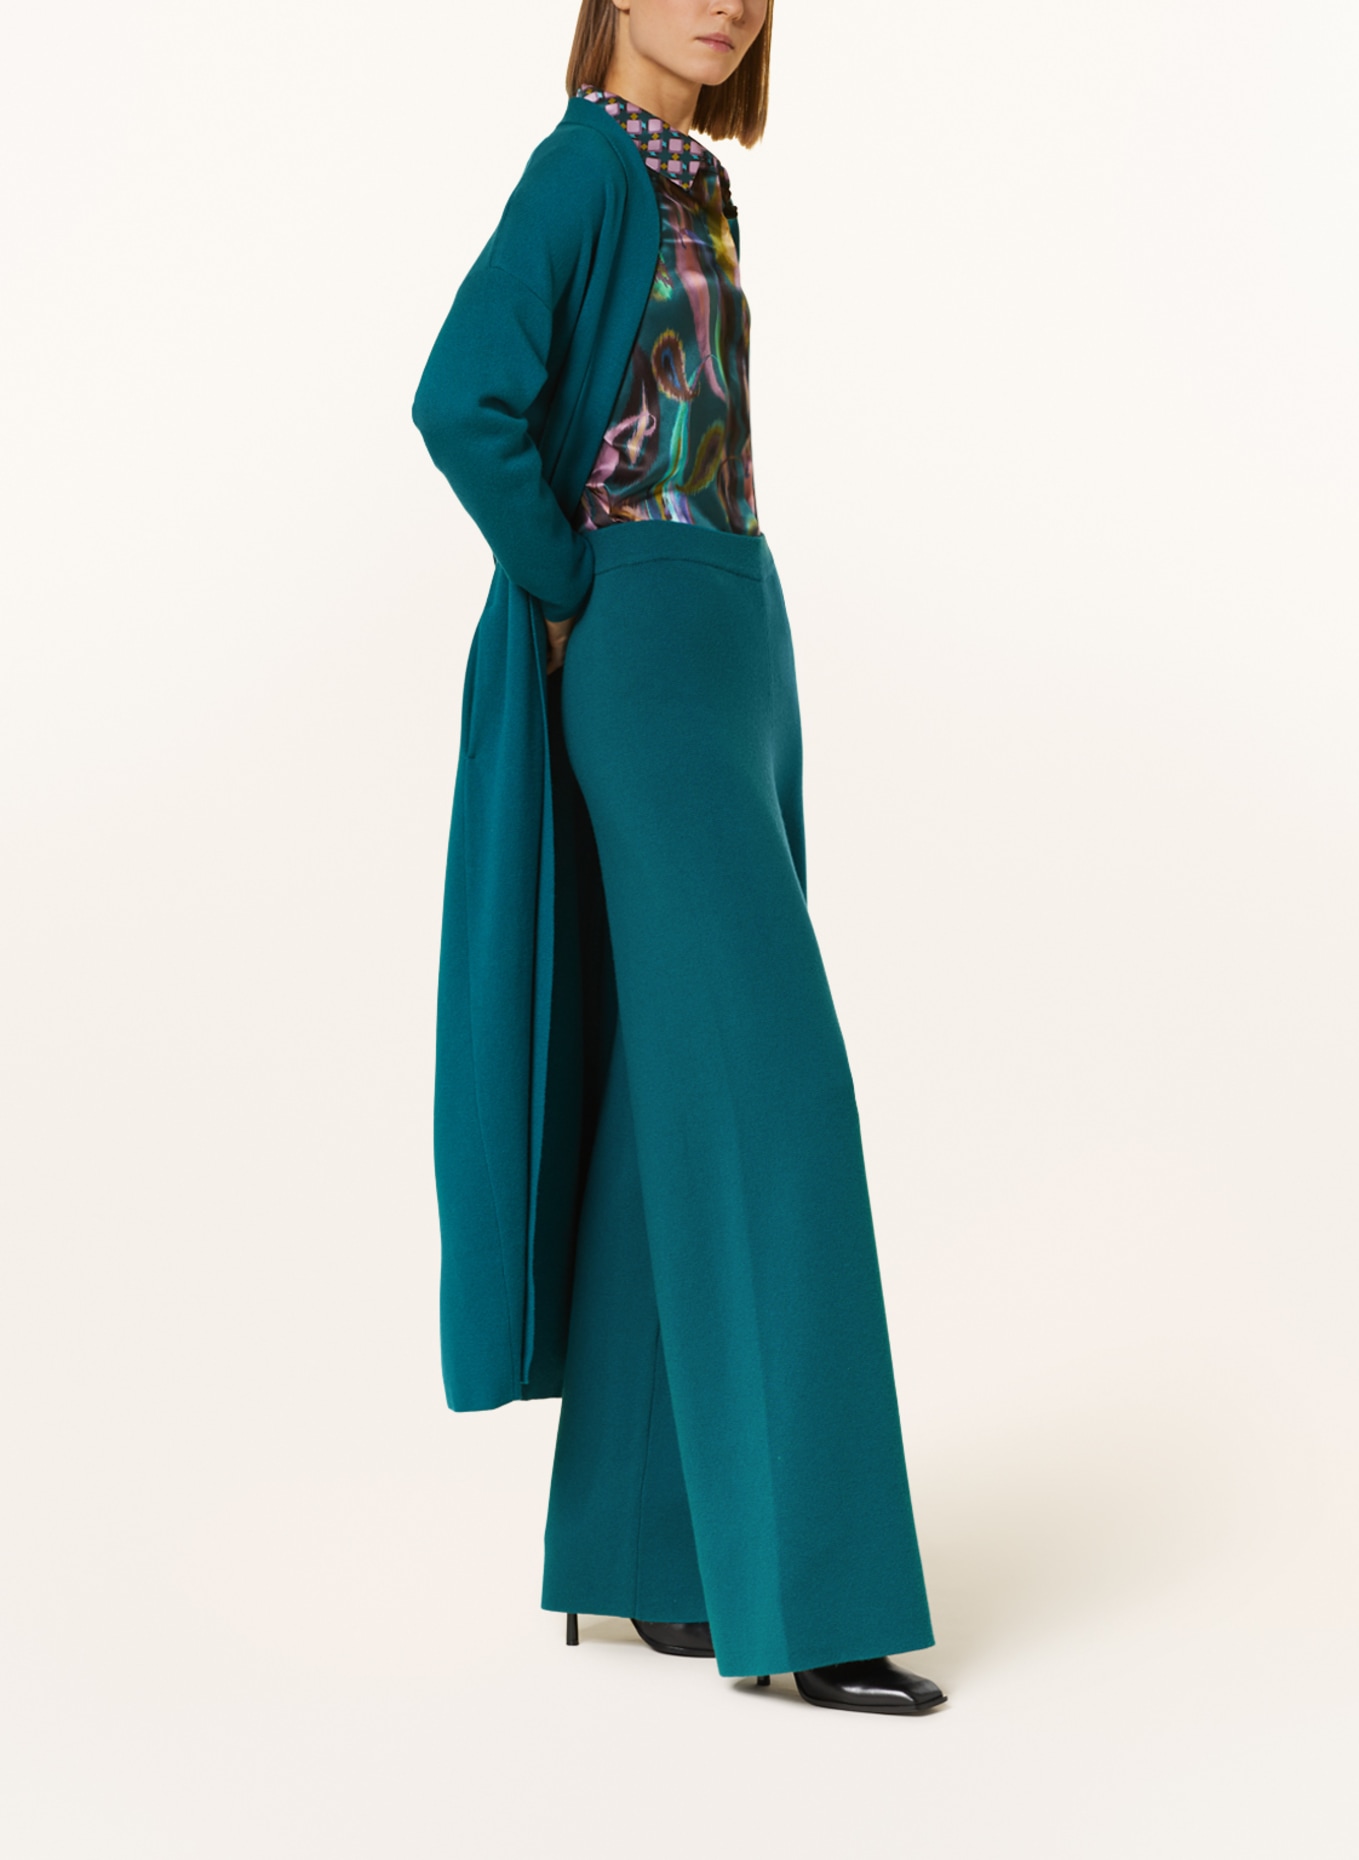 SEM PER LEI Knit trousers with cashmere, Color: TEAL (Image 4)